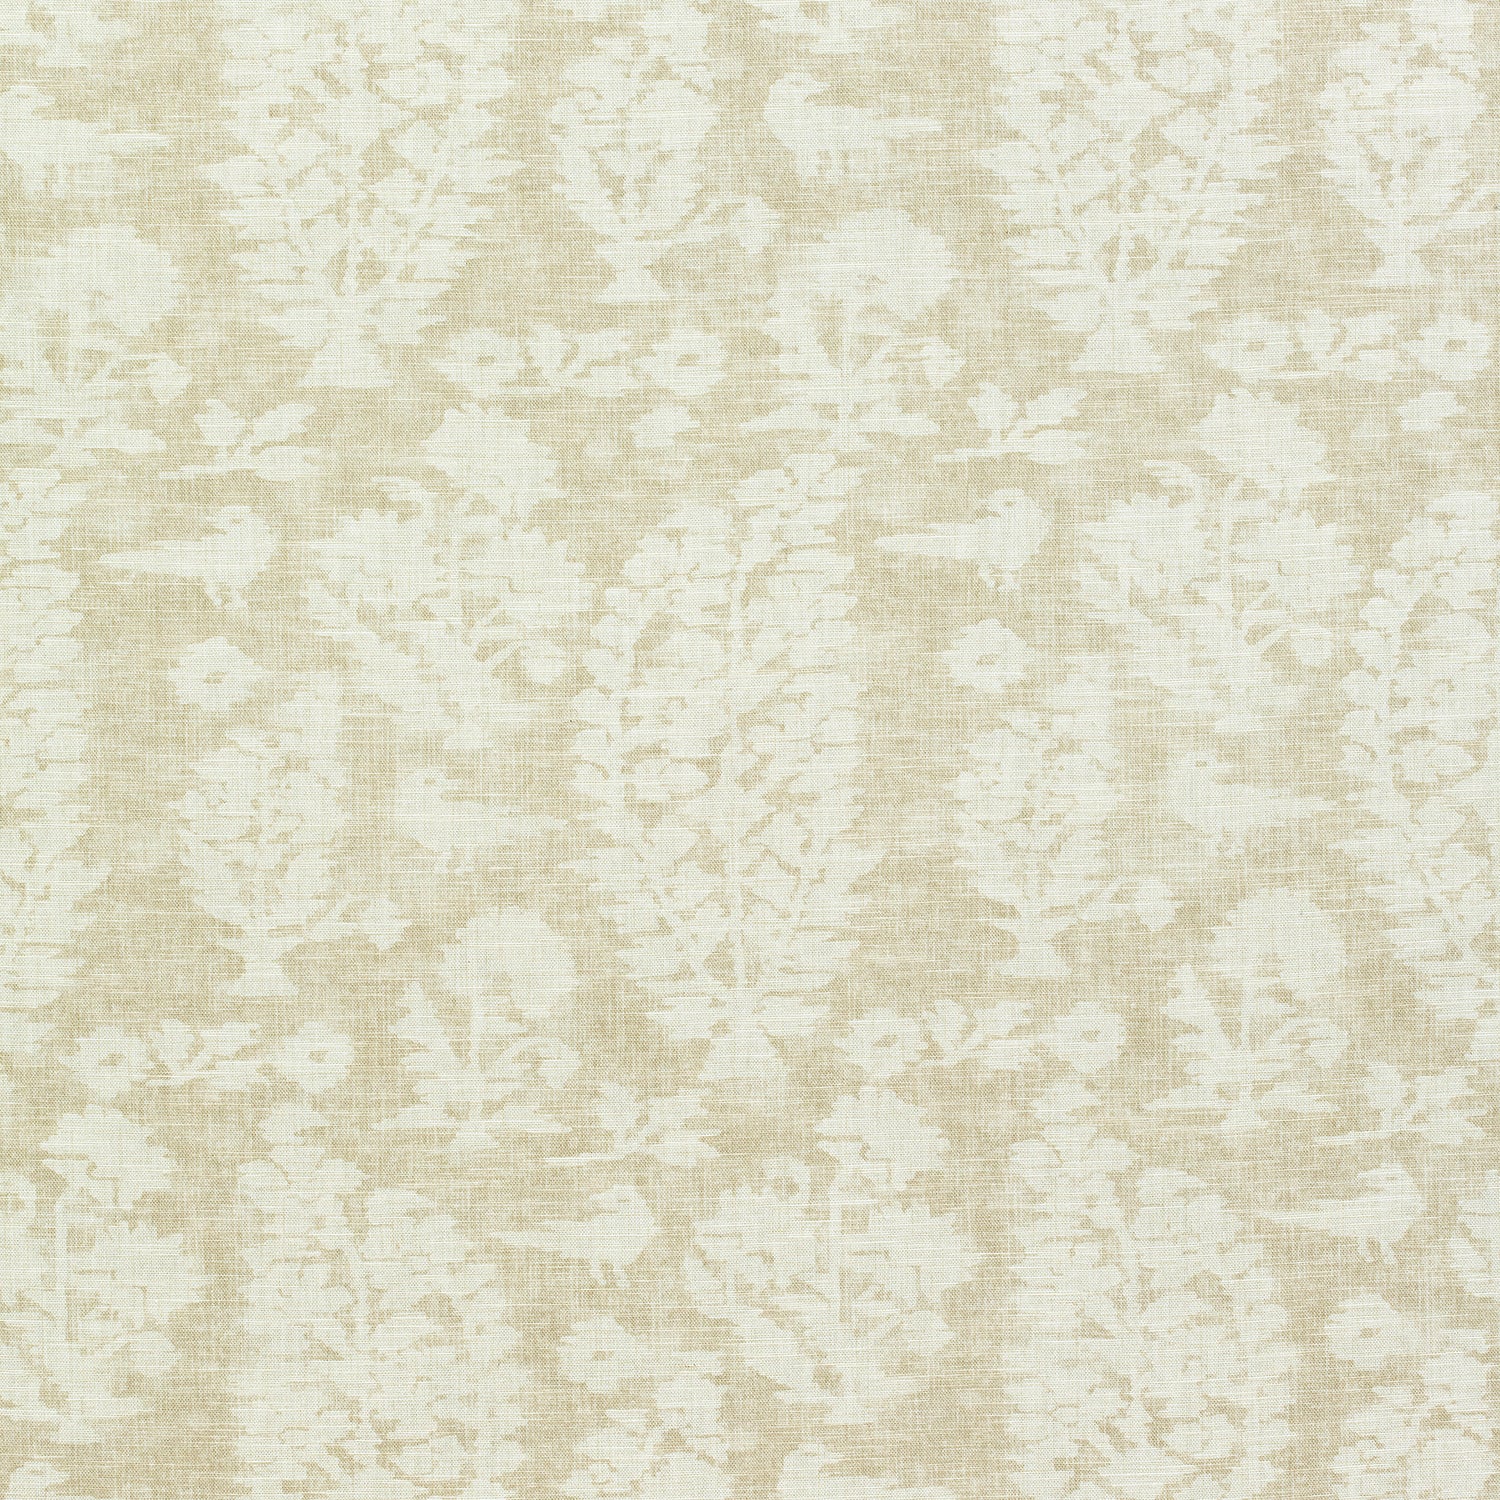 Allaire fabric in beige color - pattern number F972598 - by Thibaut in the Chestnut Hill collection